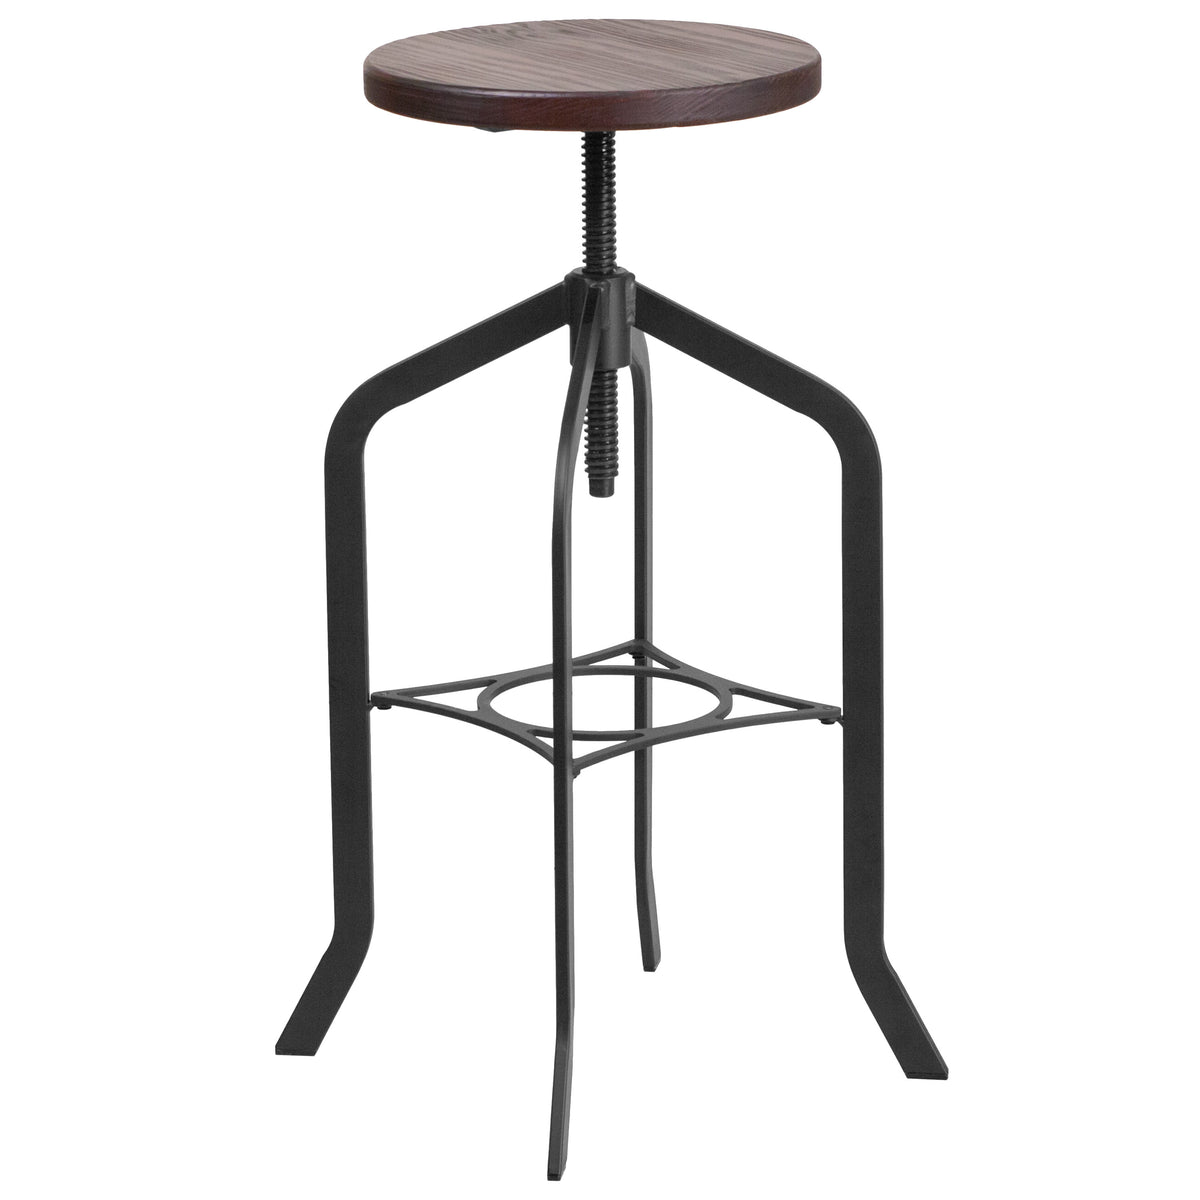 30inch Barstool with Adjustable Wood Seat - Kitchen Furniture - Rustic Stool